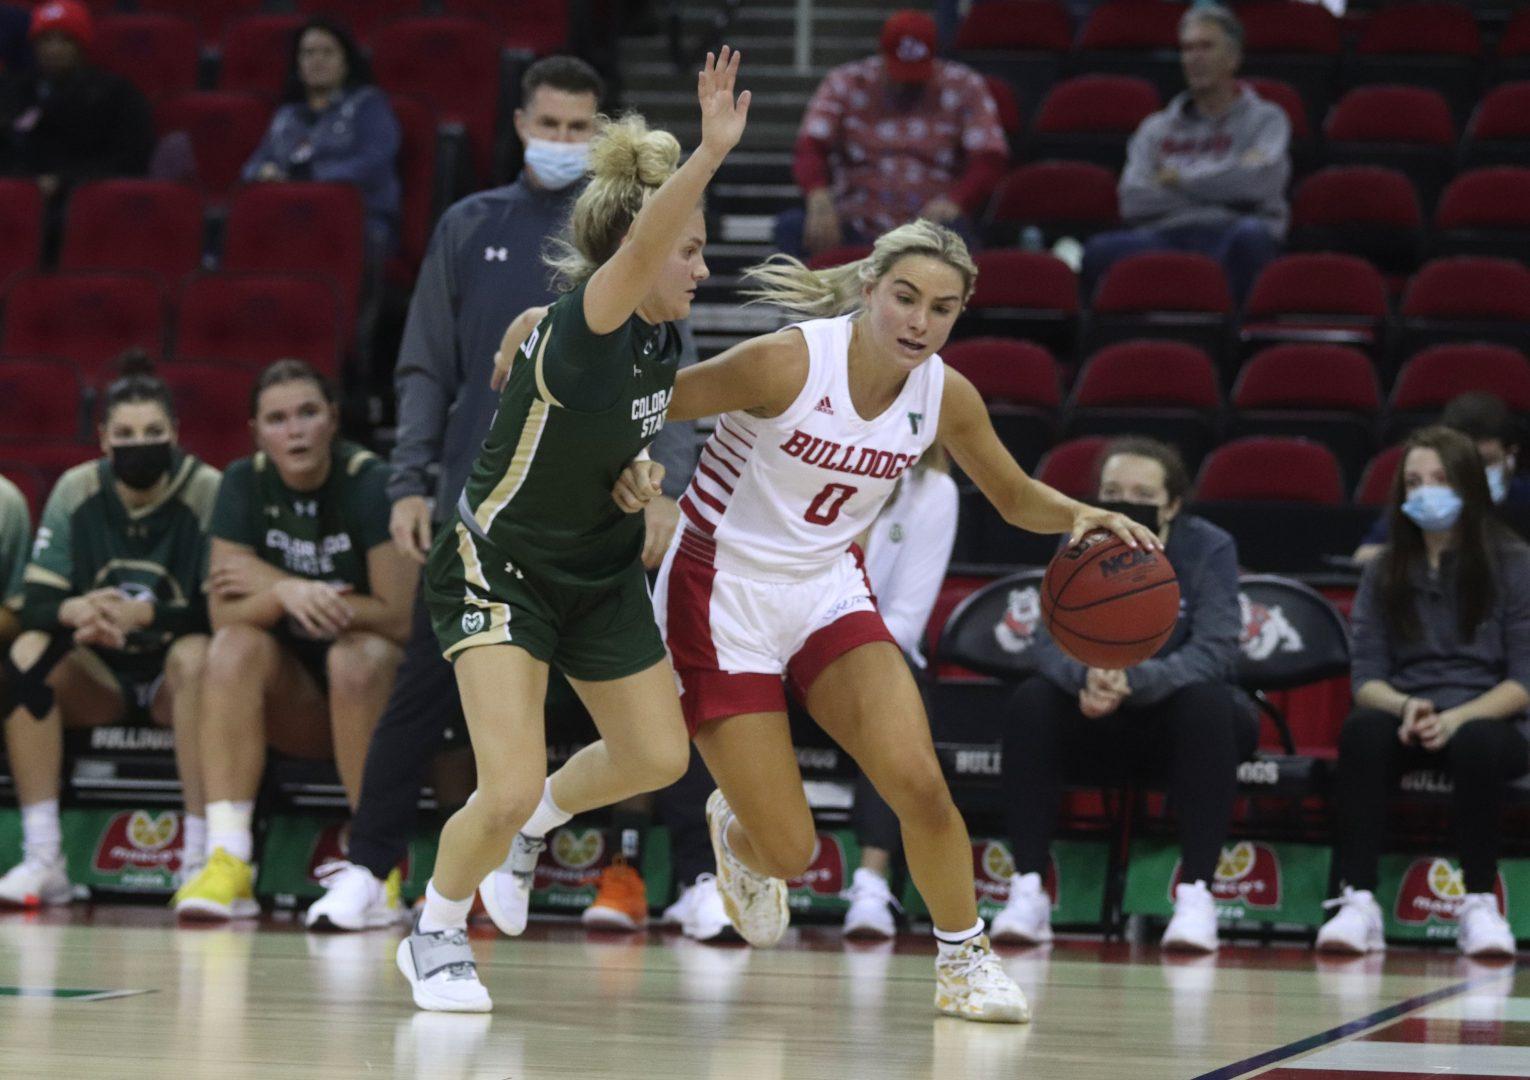 Fresno State guard Hanna Cavinder looks for an open pass to a teammate in their conference game against Colorado State, Jan. 24, 2022 at the Save Mart Center. (Melina Kazanjian/ The Collegian)